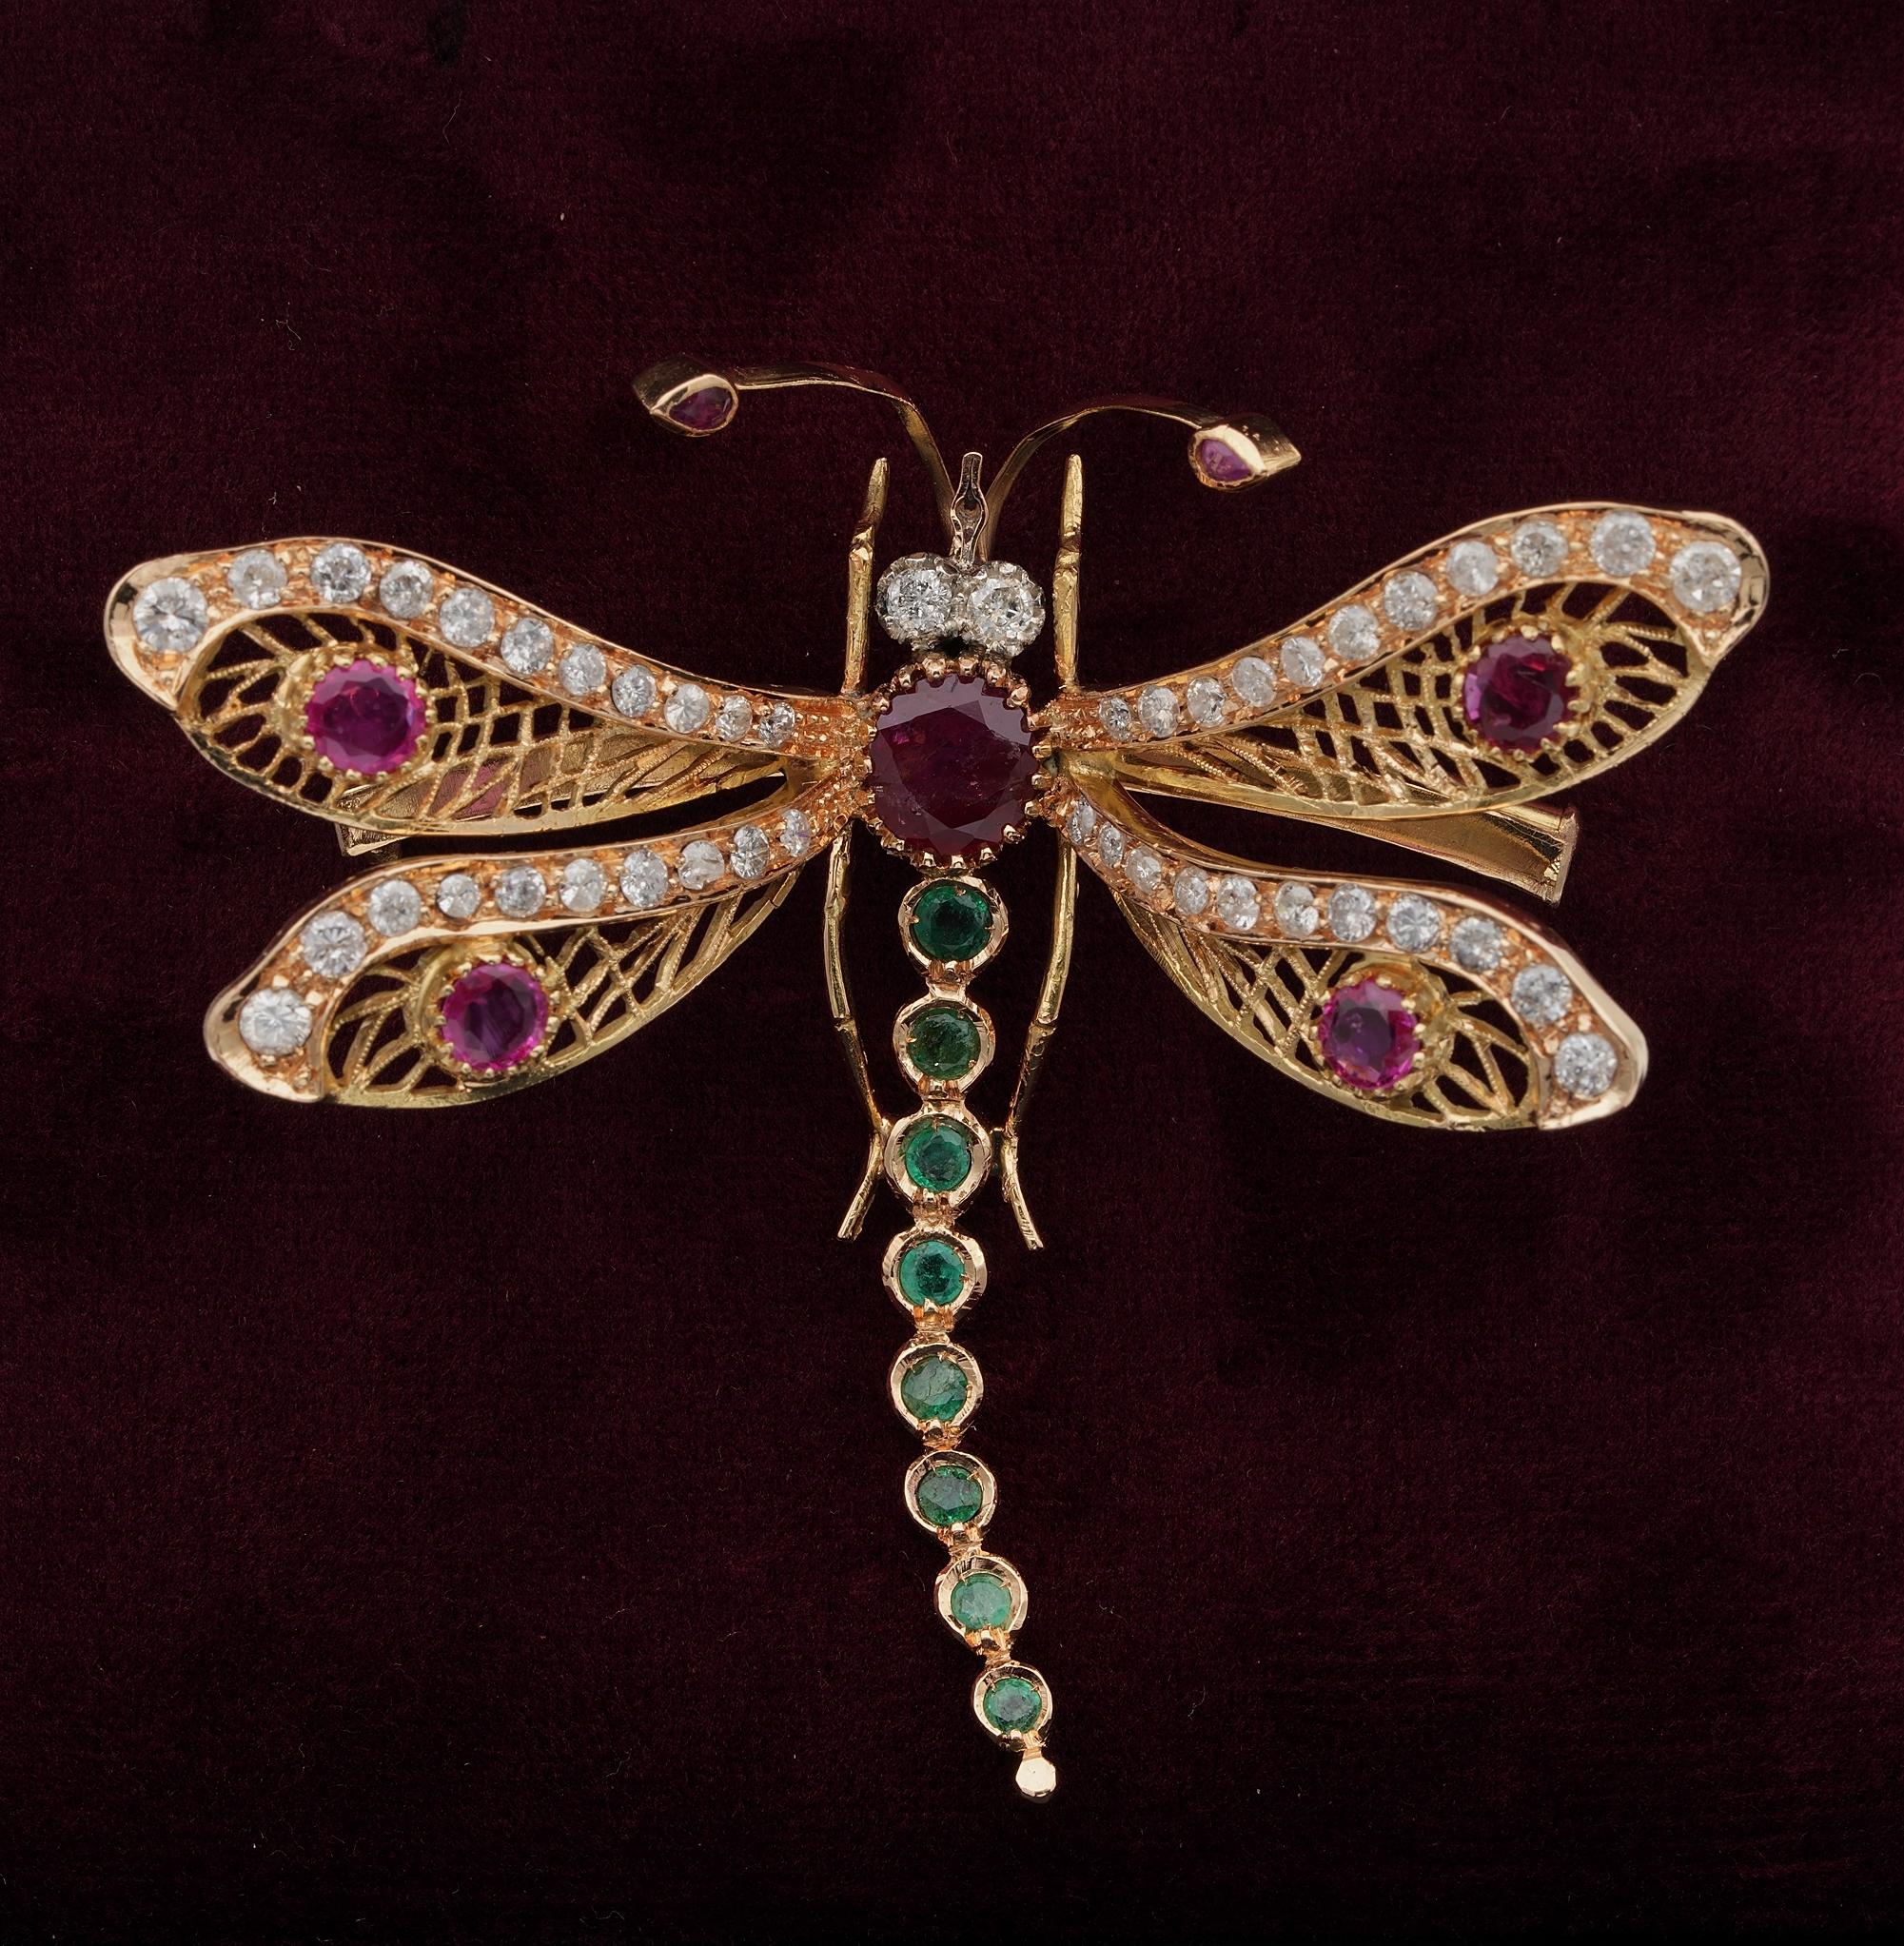 This amazing 1940 art crafted wide brooch, is made to attract the attention
The impressive openwork has been hand created of solid 18 Kt gold
Ethereal elegance related to the Dragonfly, one of the most beautiful ever loved insect in